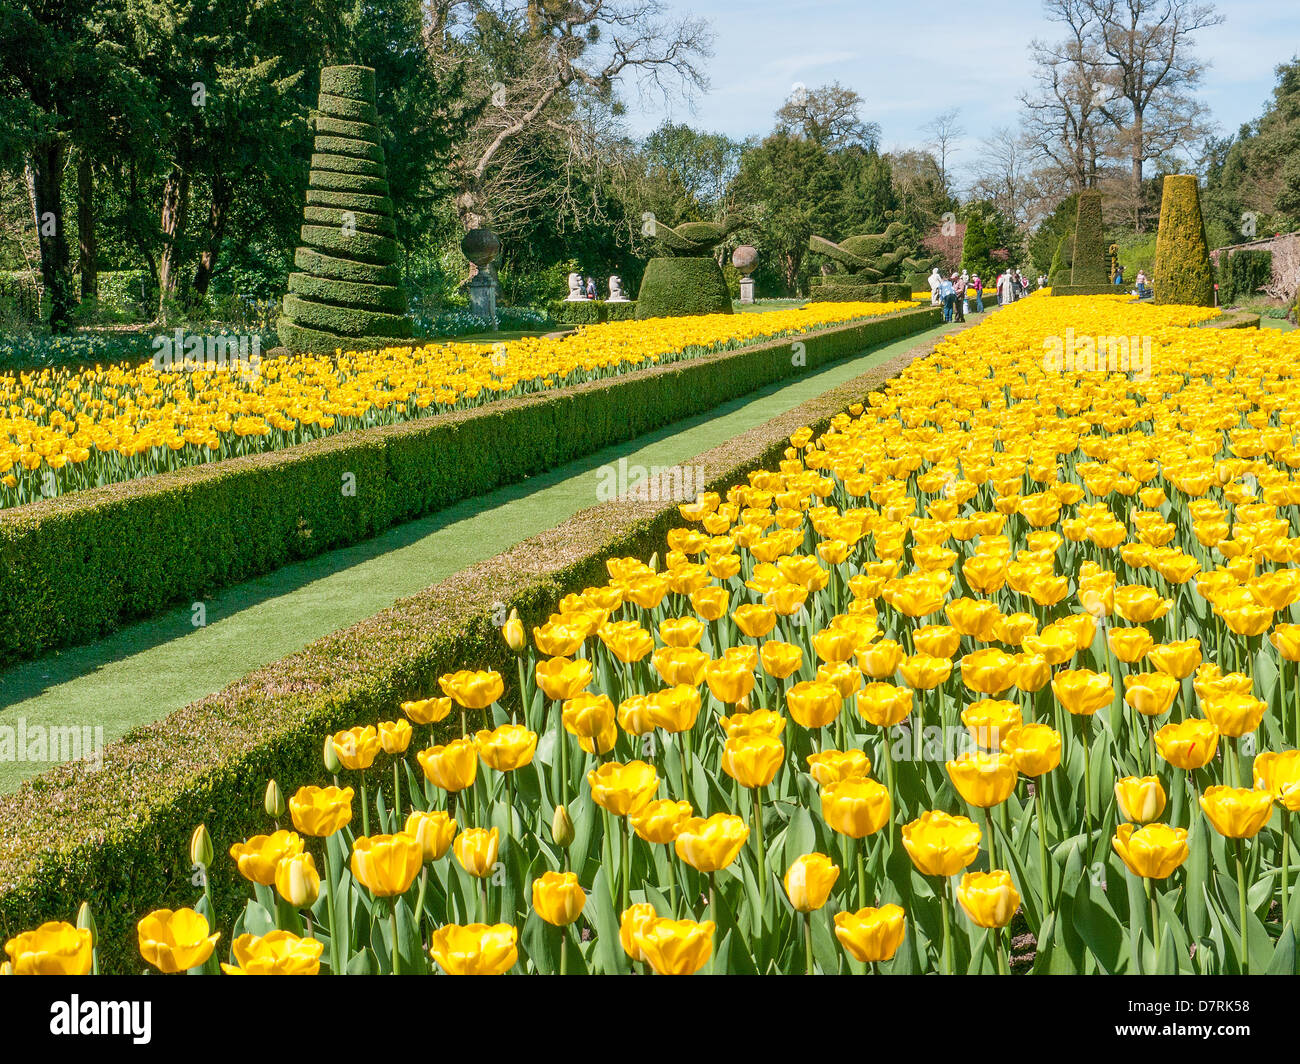 Display of tulips in the Long Garden, Cliveden House, National Trust Property, Bucks, UK Stock Photo